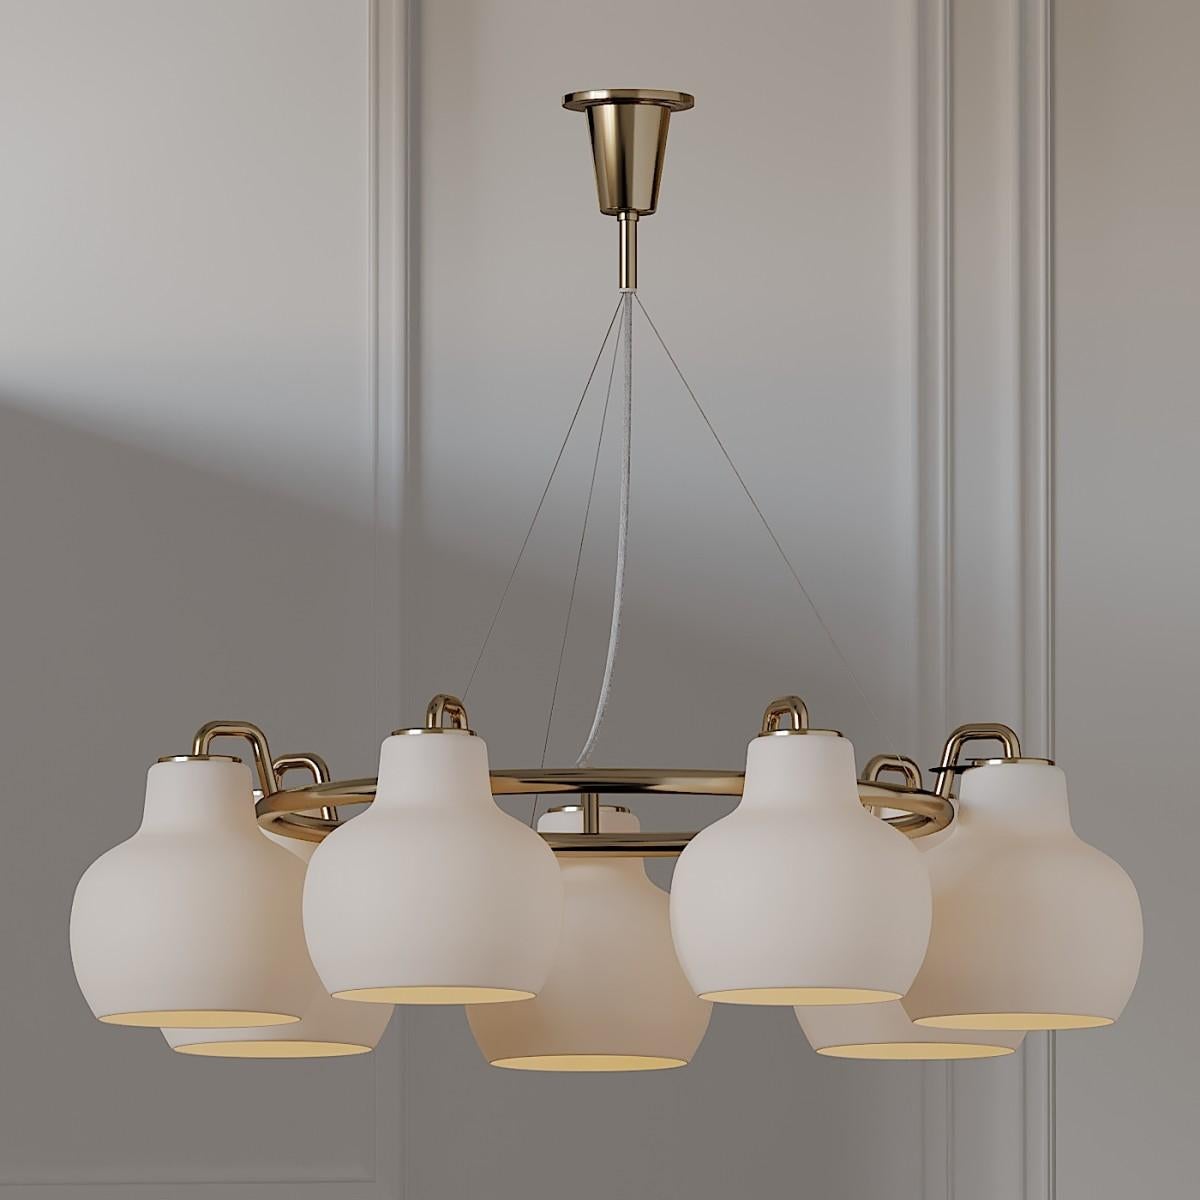 US VERSION Louis Poulsen, pendant 7 light by Vilhelm Lauritzen
Measures: Width 893 x height 233 x length 893(mm), 10.8 kg
 
7 Shades. Material: Shades: Mouth-blown, 3-layered, polished opal glass. Frame and canopy: Satin polished brass,